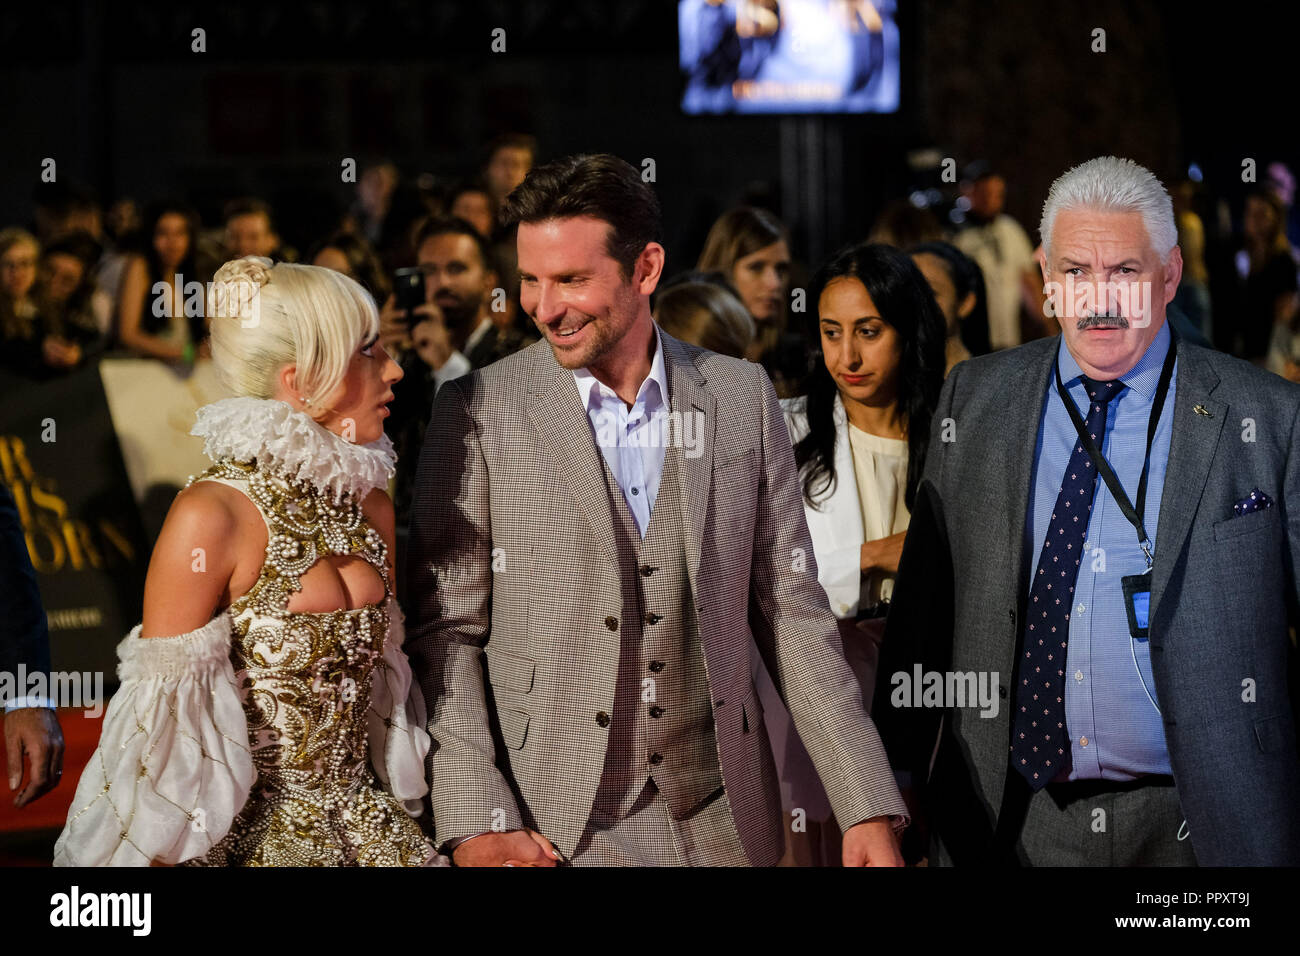 London, UK. 27th September, 2018. Lady Gaga and Bradley Cooper at  A STAR IS BORN UK Premiere on Thursday 27 September 2018 held at The Vue Cinema, Leicester Square, London. Pictured: Actress, Stefani Joanne Angelina Germanotta, Lady Gaga, Bradley Cooper. Picture by Julie Edwards. Credit: Julie Edwards/Alamy Live News Stock Photo